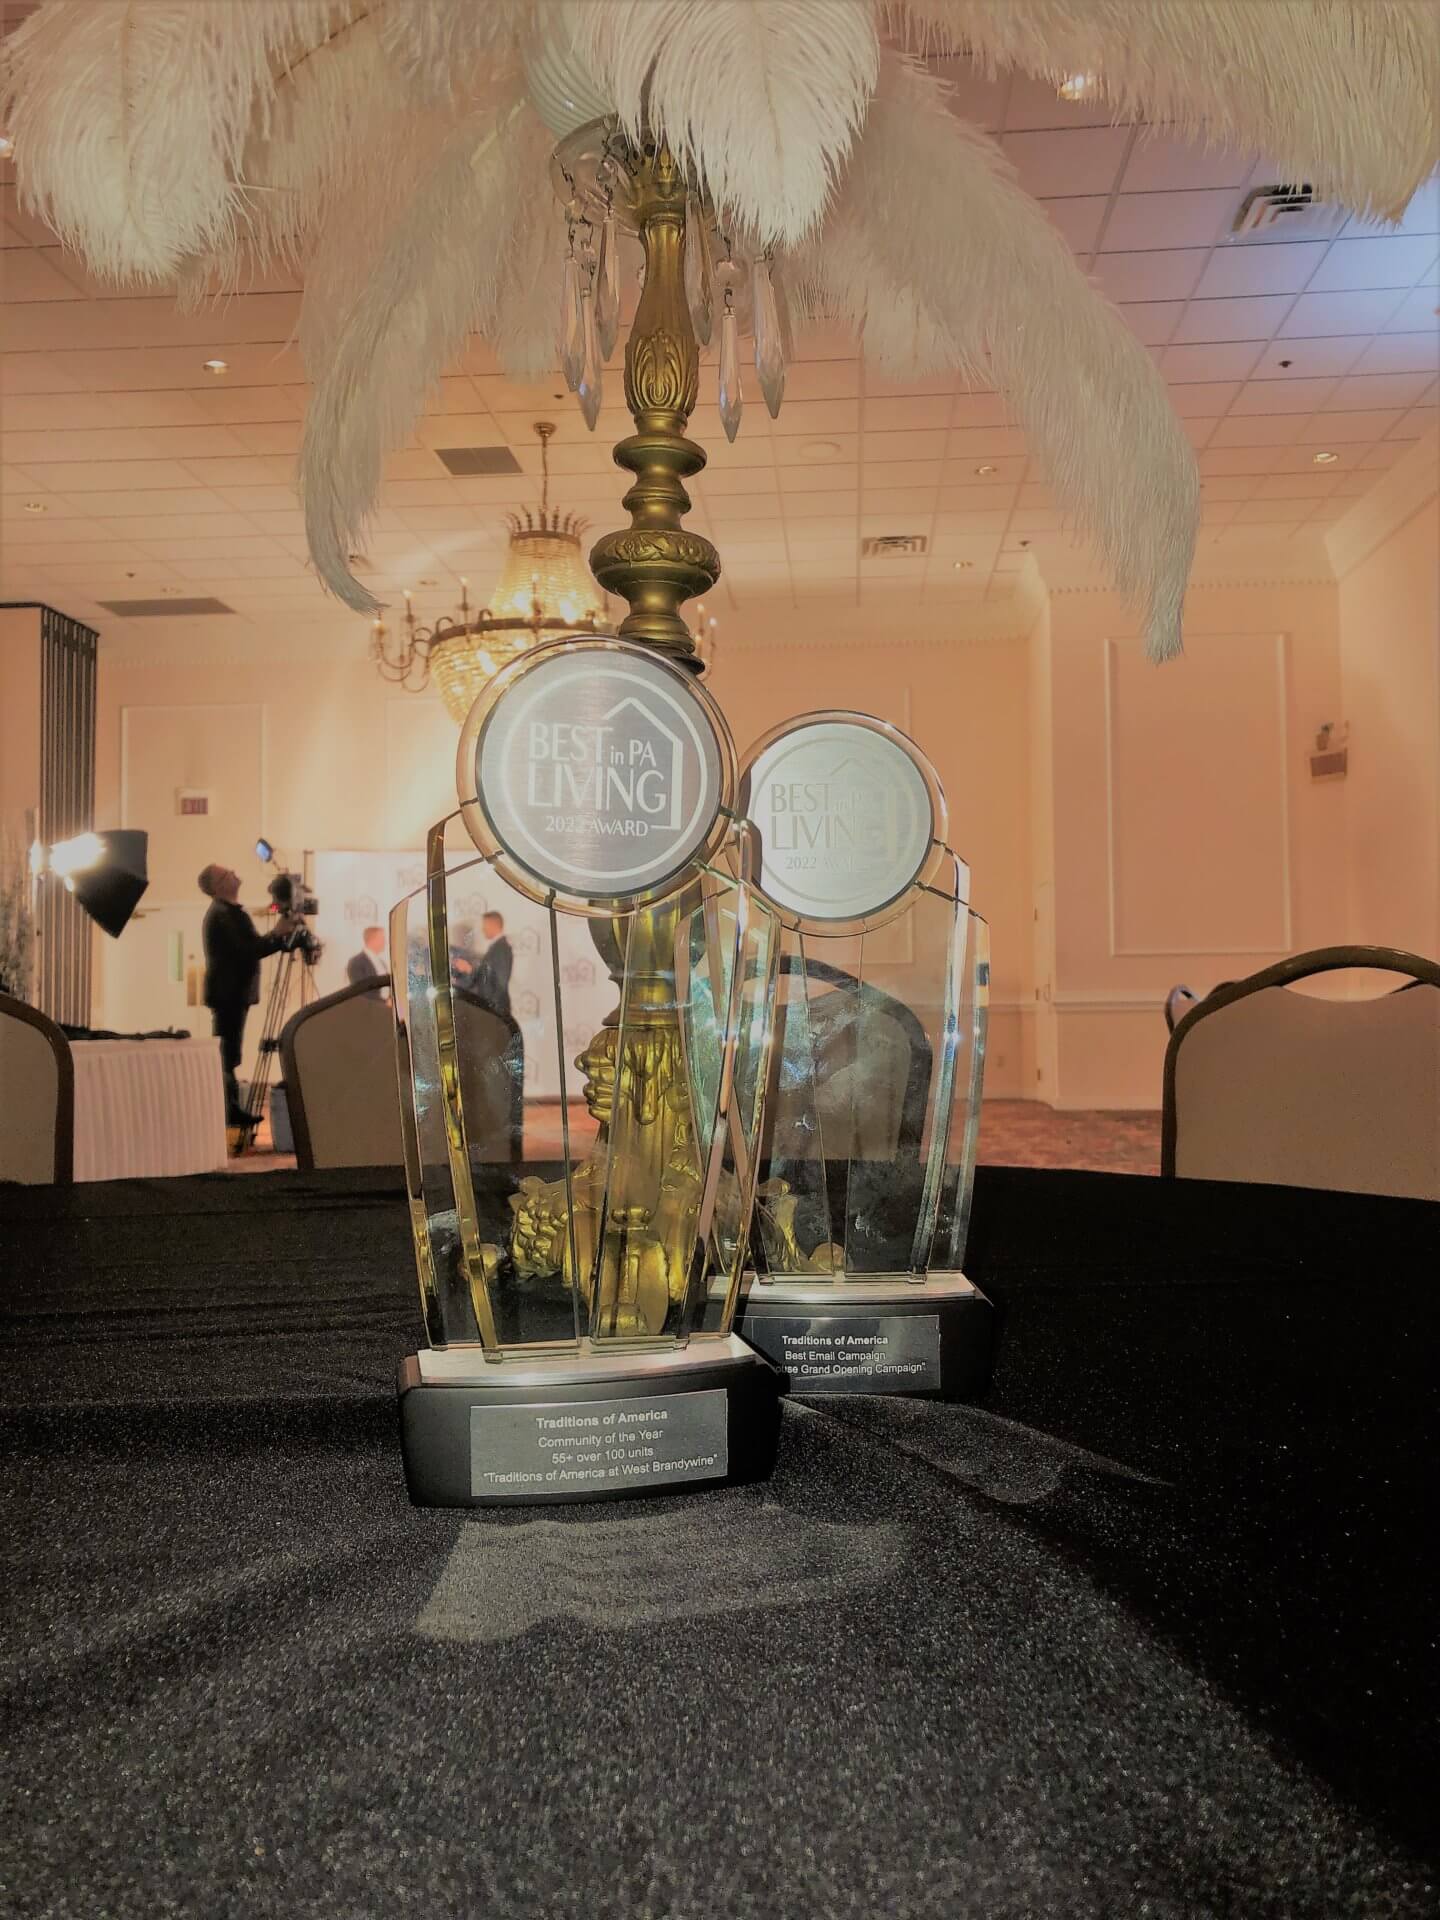 Best of PA Living Awards Trophy for 2022